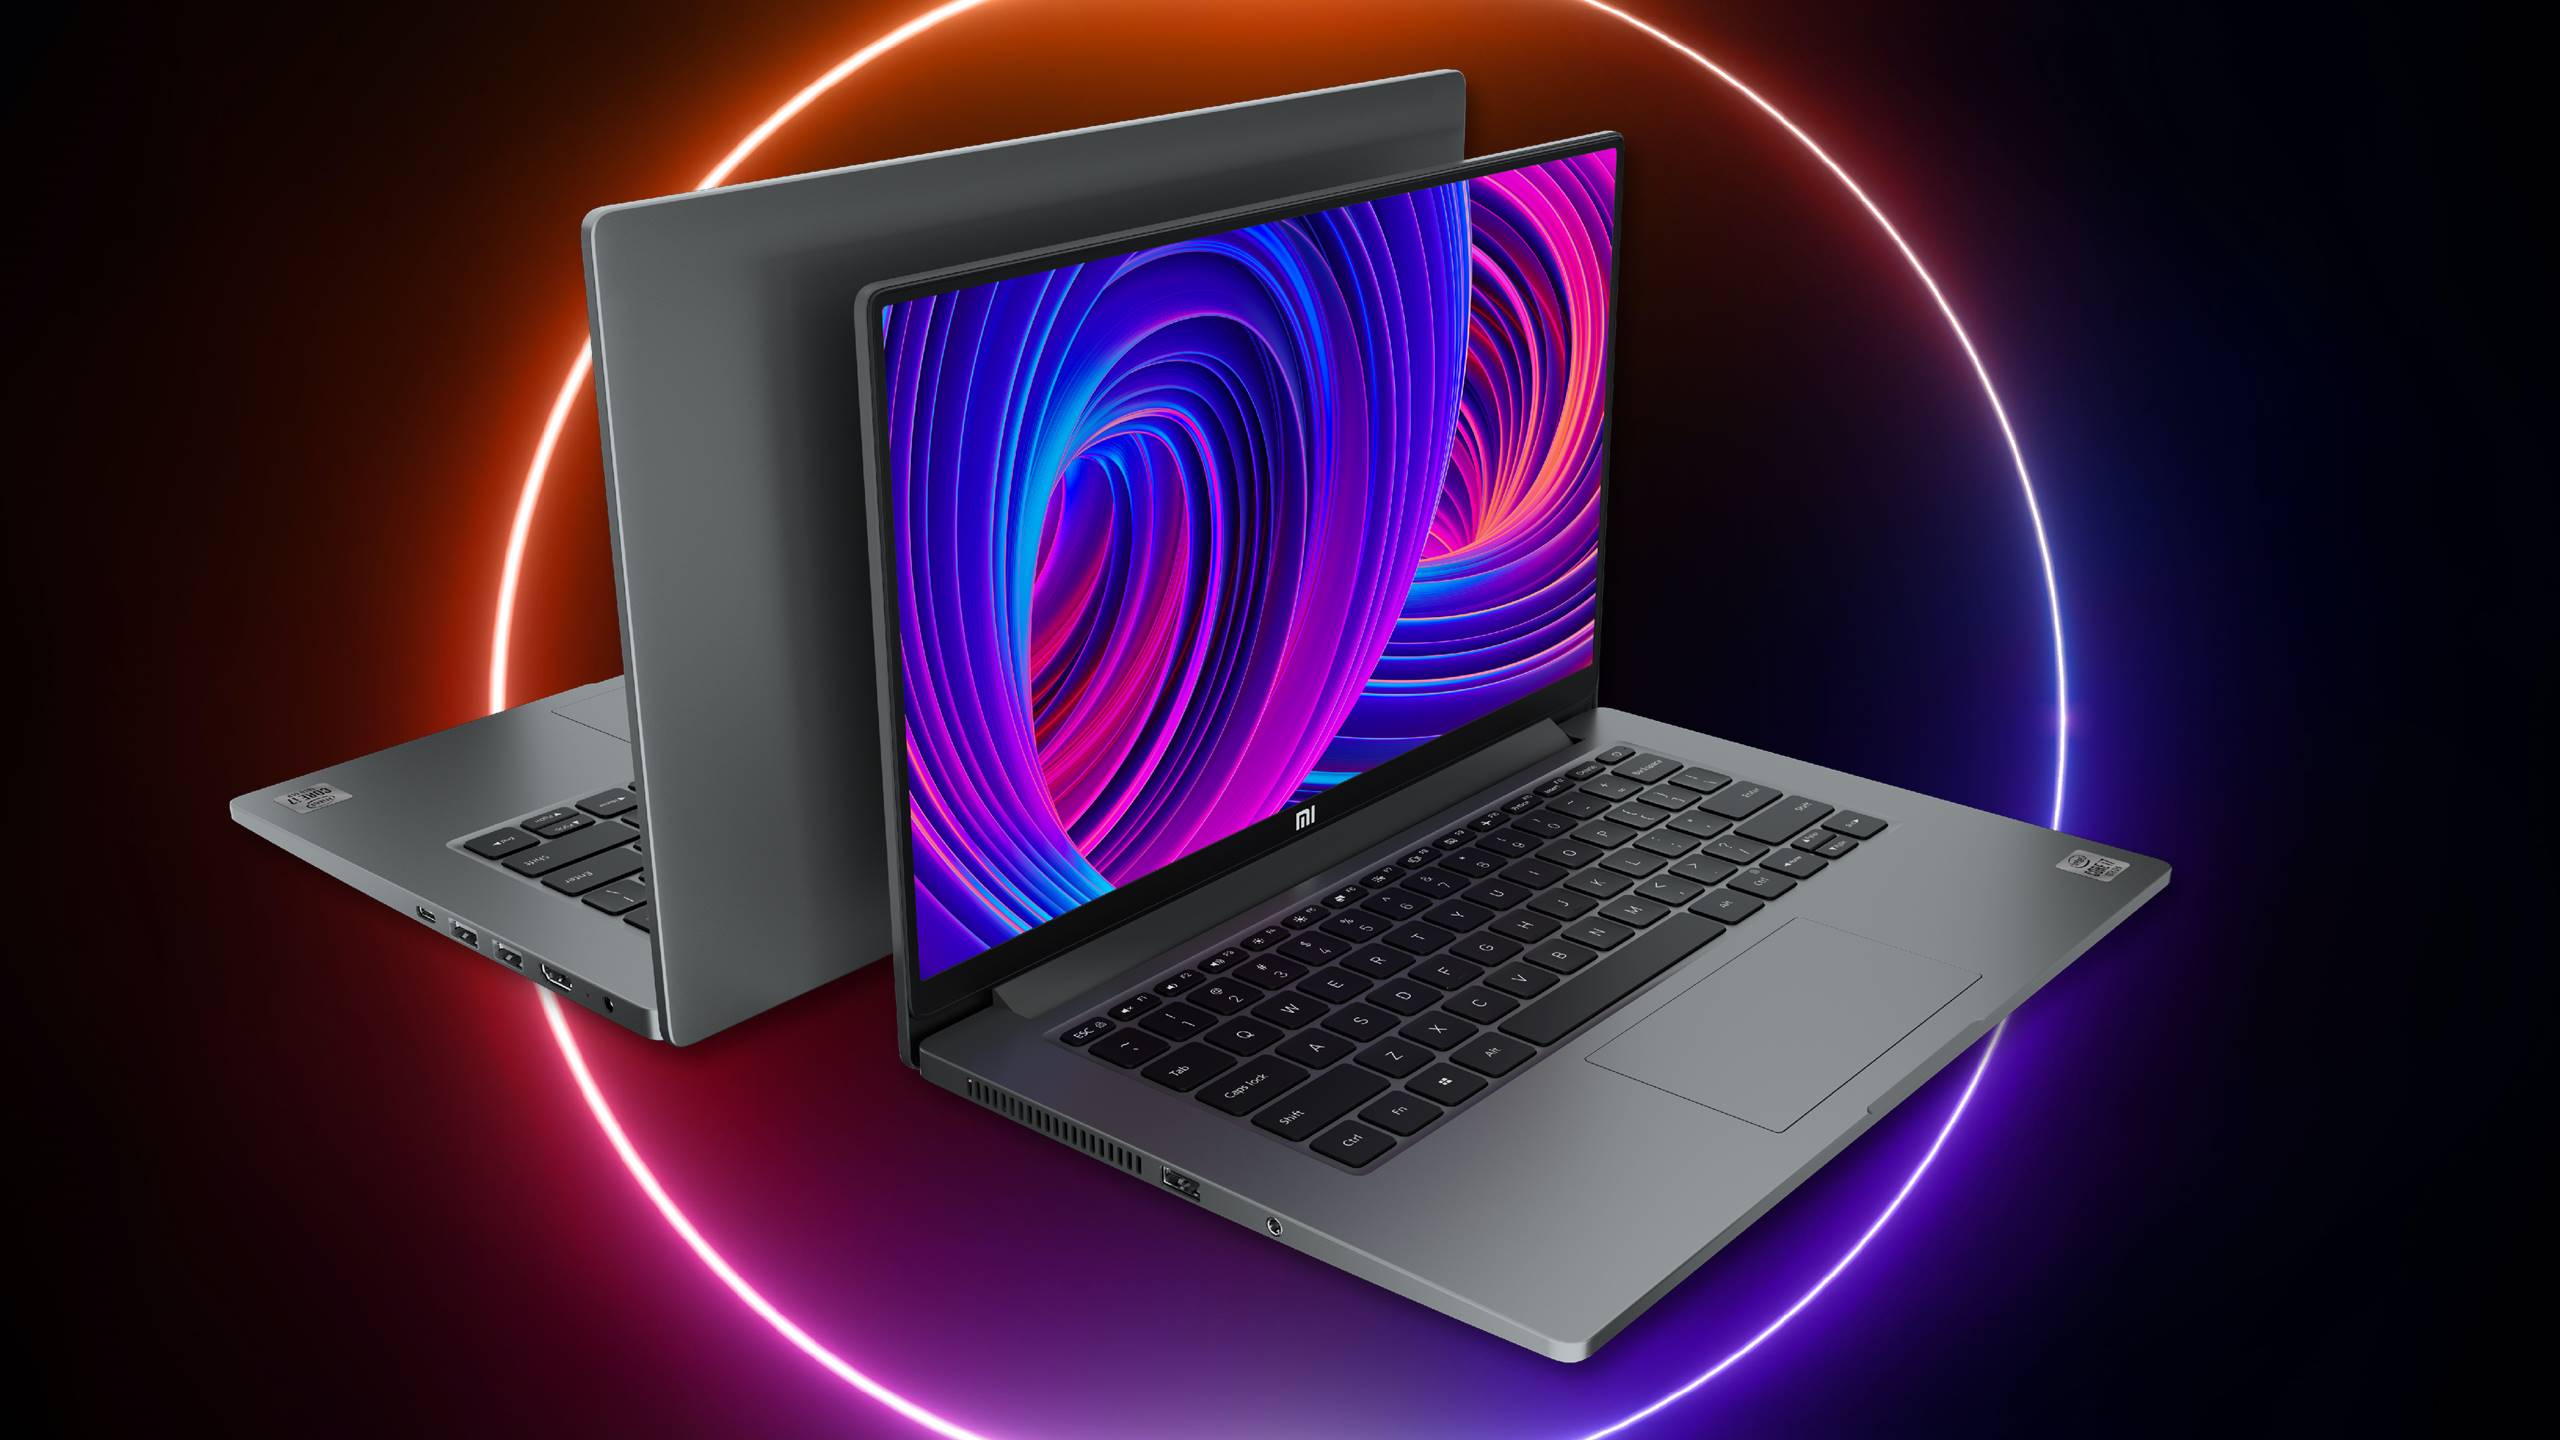 Mi NoteBook 14 series is launched in India with 10th generation Intel processors